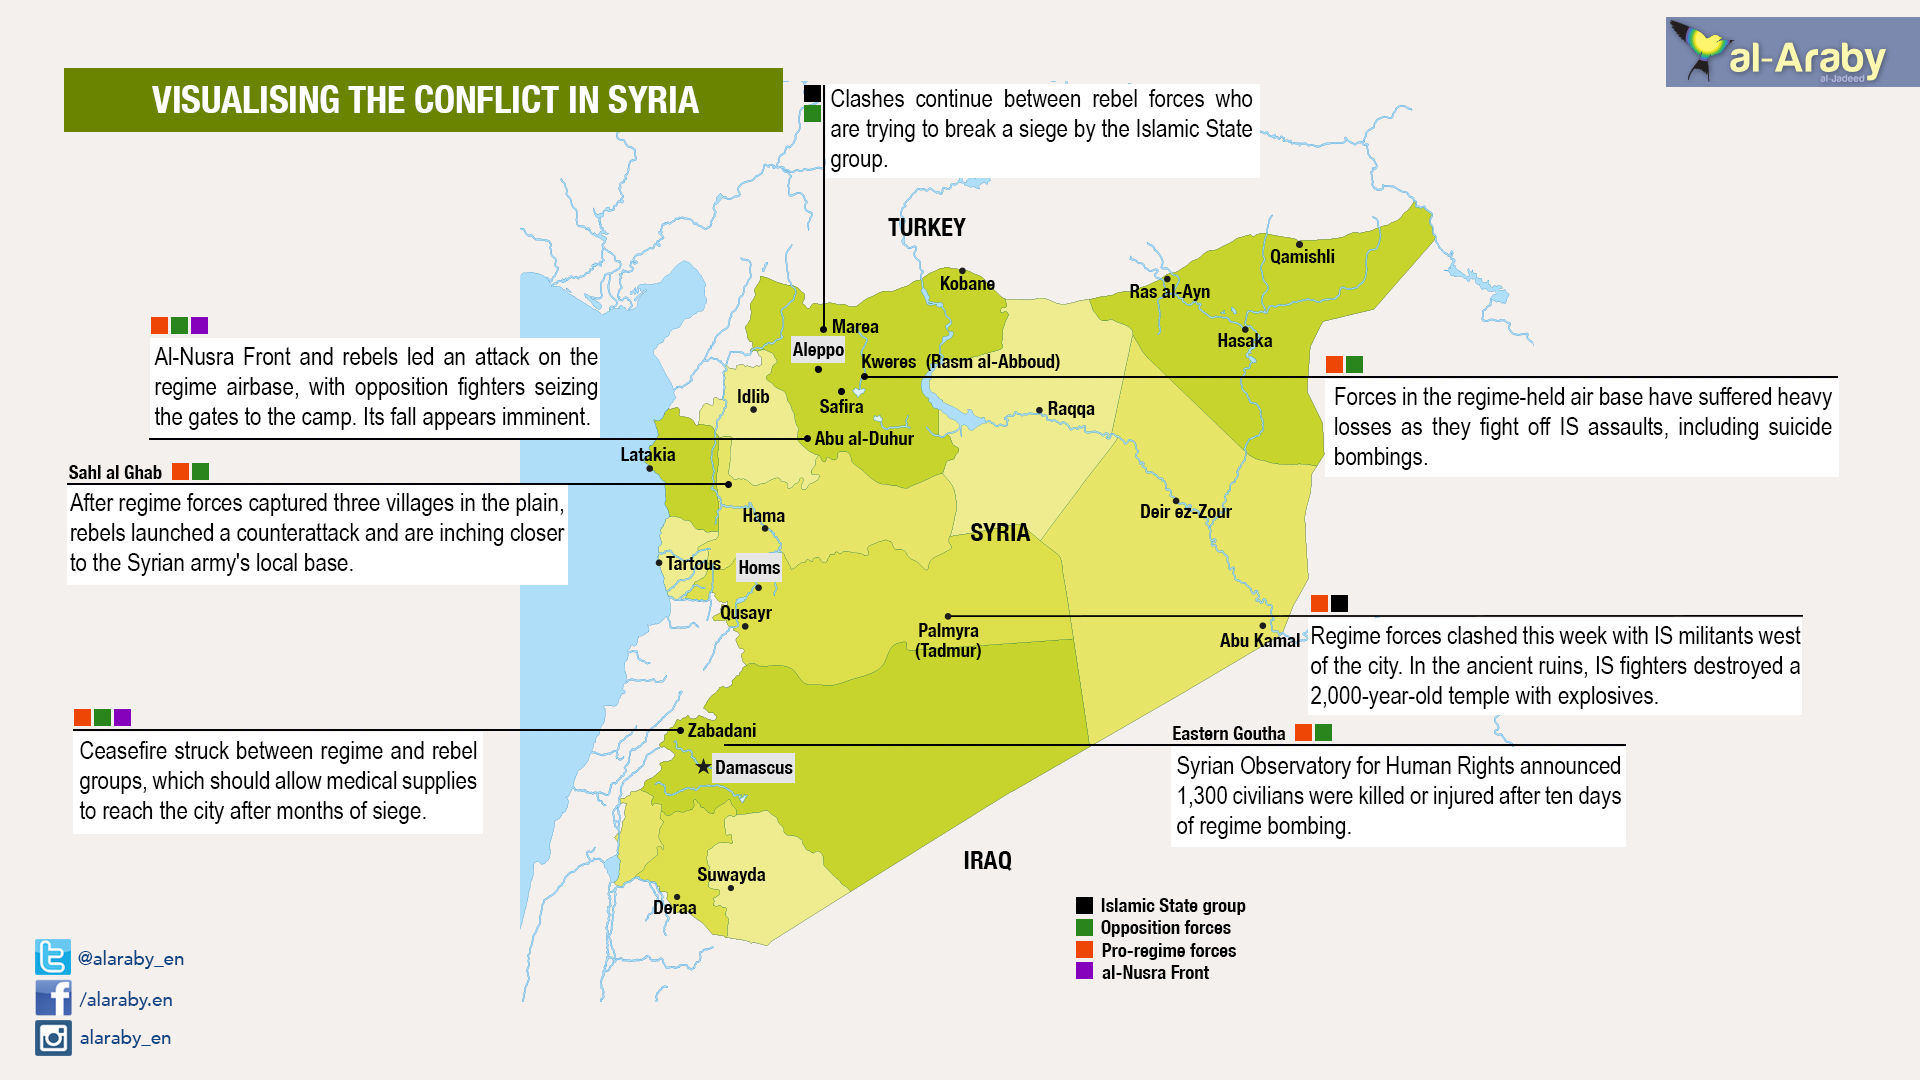 visualising-the-conflict-in-syria.jpg